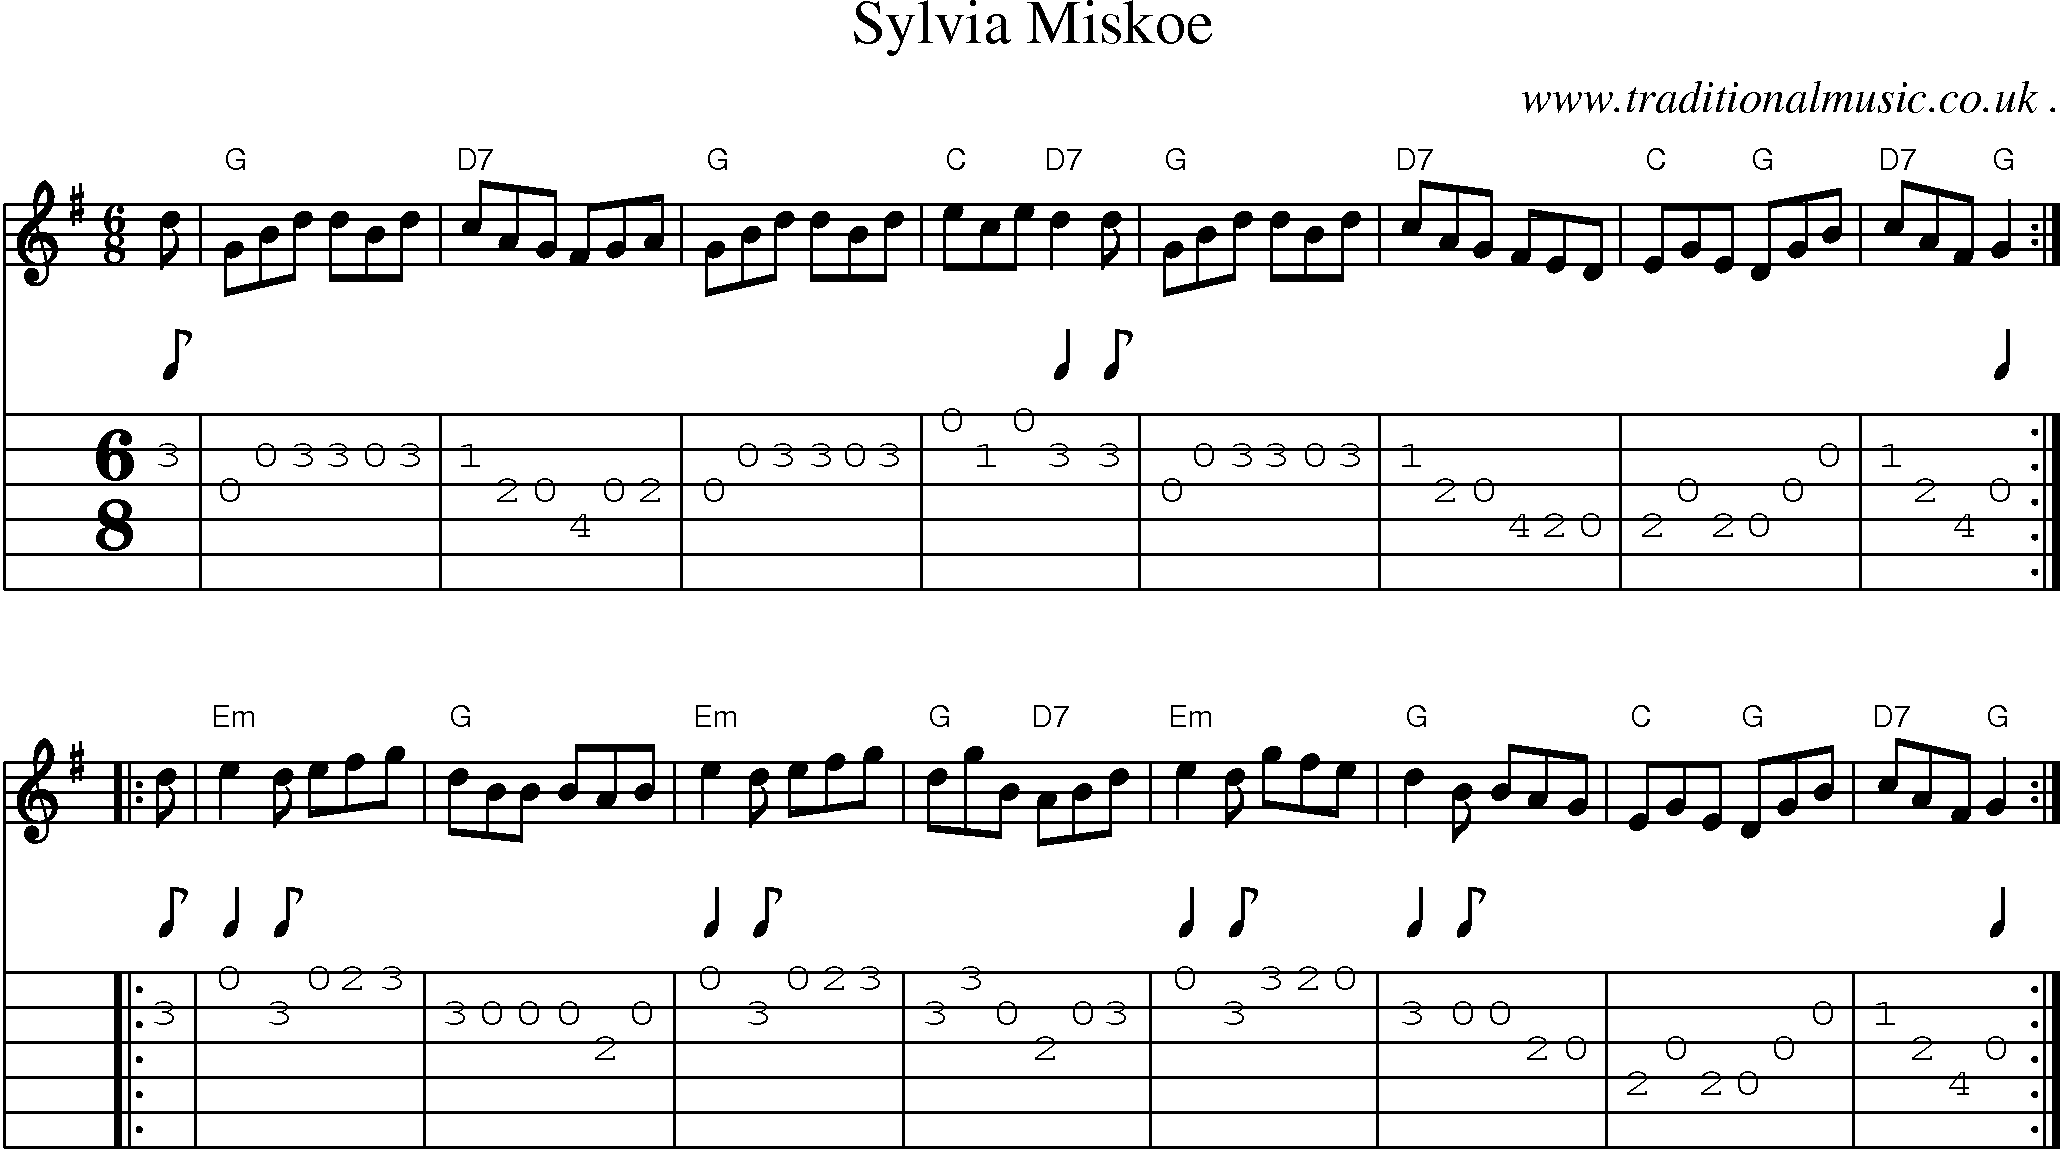 Sheet-music  score, Chords and Guitar Tabs for Sylvia Miskoe